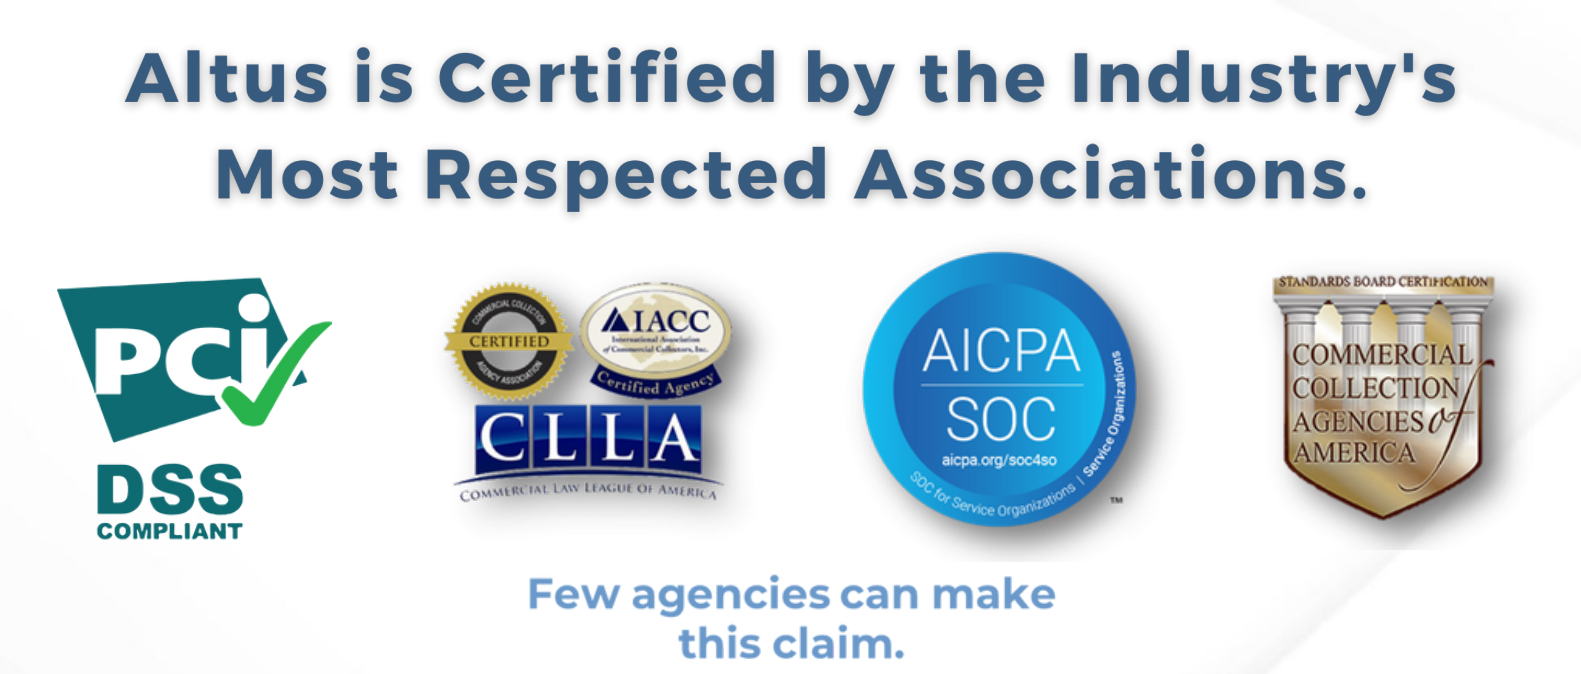 altus is certified by the industry's most respected associations